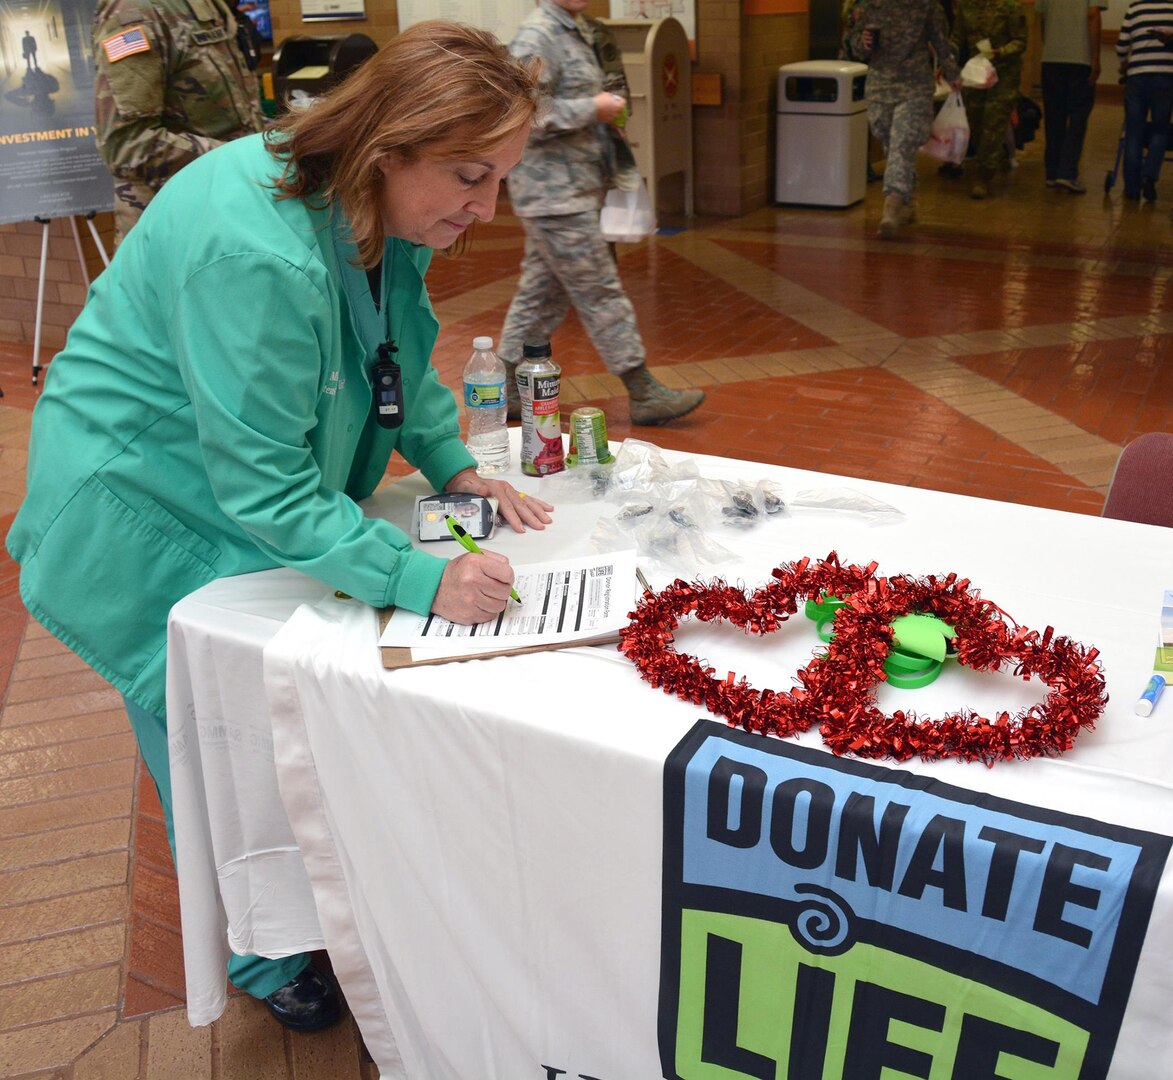 Laura Vaughn, Brooke Army Medical Center nurse, signs up for the donor registry during BAMC’s National Hospital Organ Donation Campaign kickoff at the medical center Feb. 14. In 2016, BAMC had 17 donors, 70 organs transplanted, 30 cornea and 20 tissue donors with 100 percent referral rate and 80 percent conversion rate (converting eligible donors into actual donors).